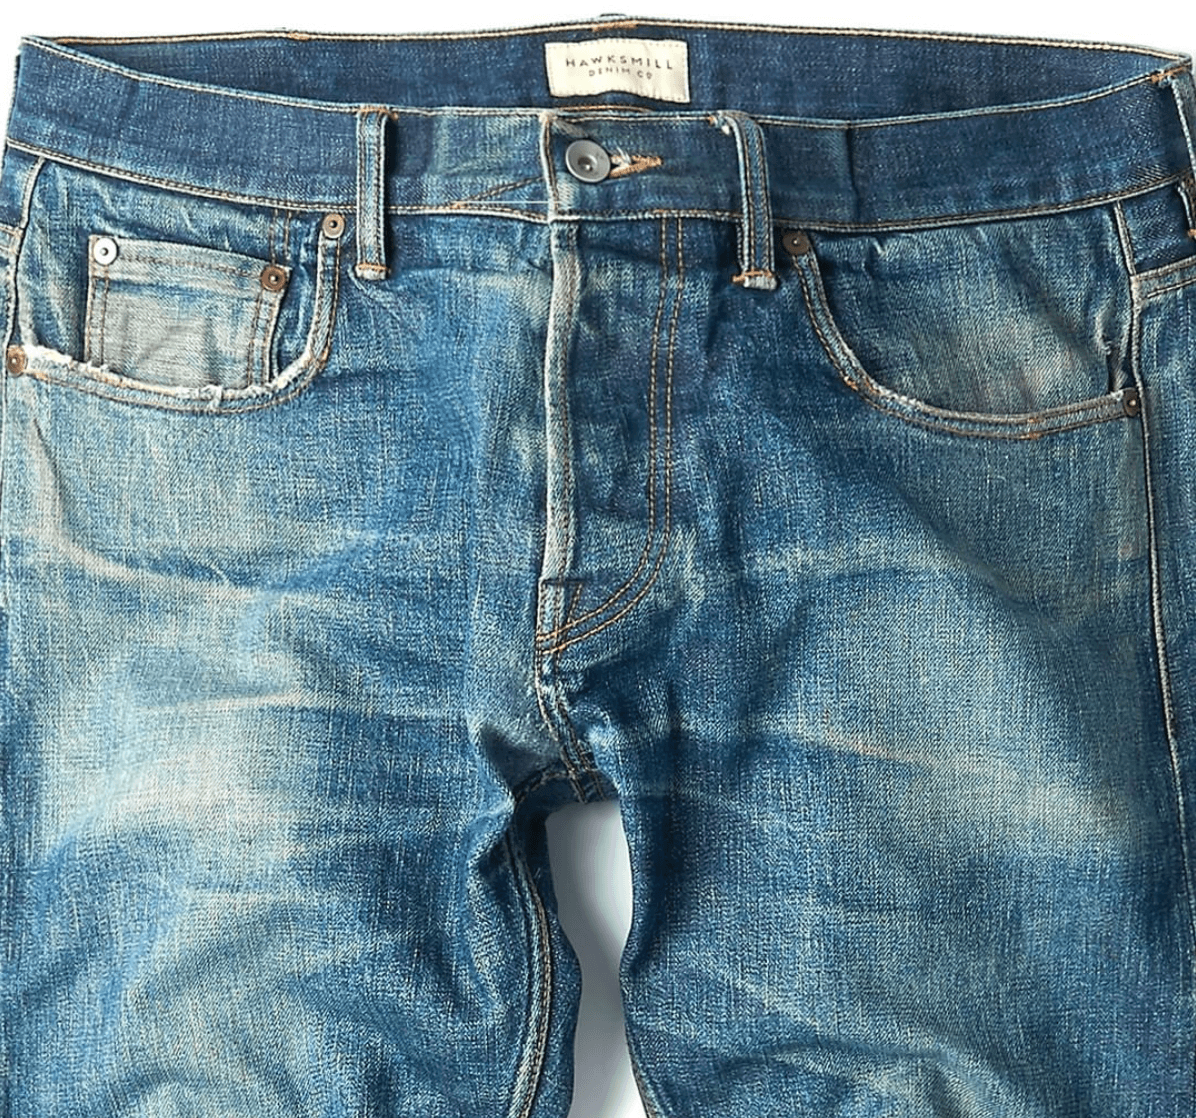 How To Clean and Wash Your Raw Denim – Tips, Instructions - Textile  Magazine, Textile News, Apparel News, Fashion News